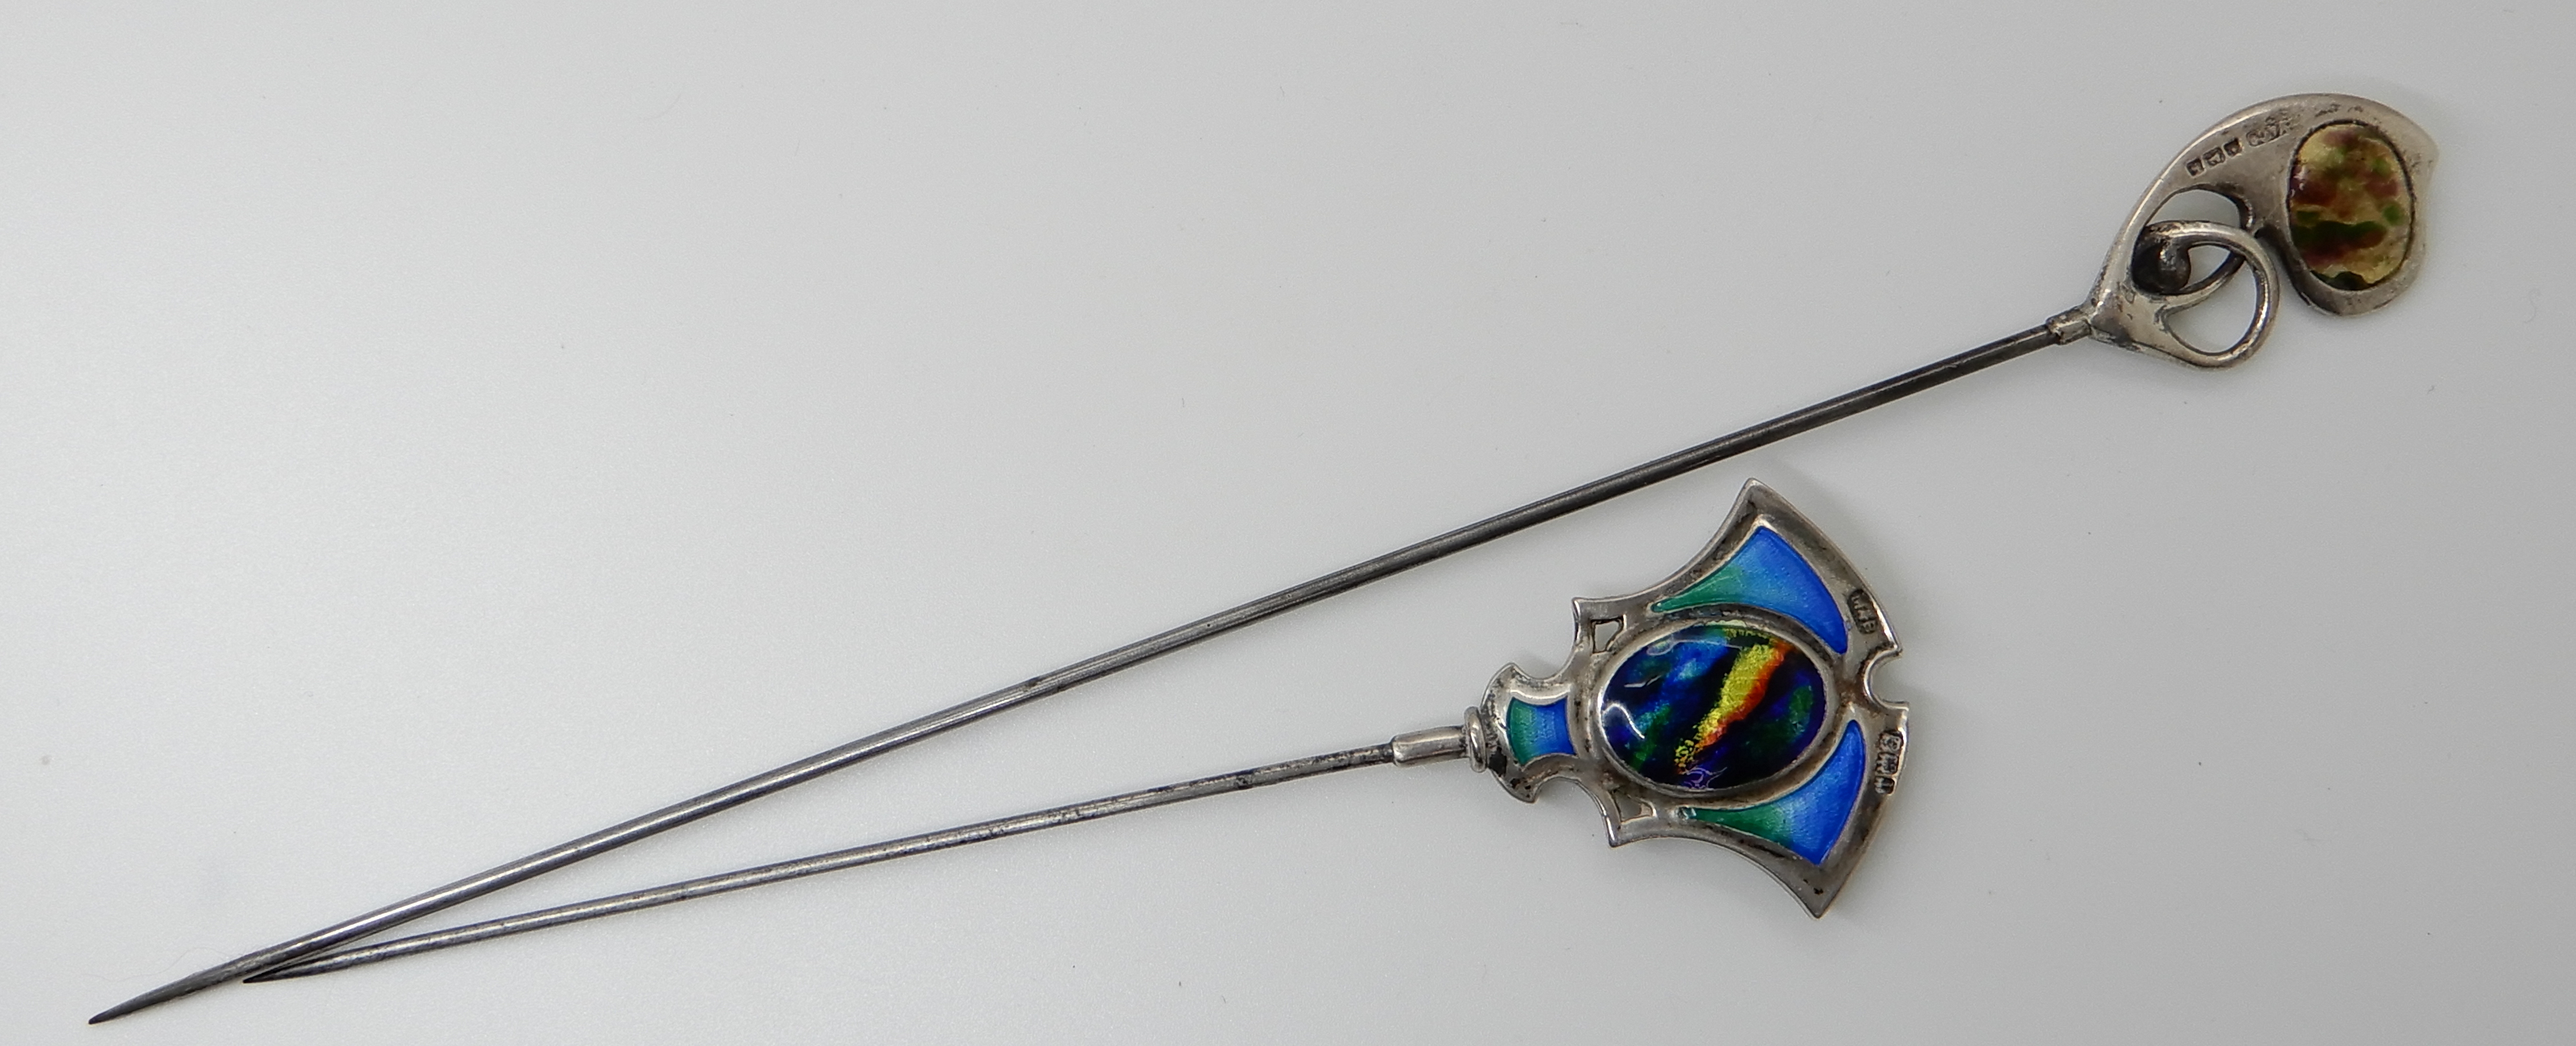 TWO SILVER AND ENAMEL ART NOUVEAU HATPINS enamelled in purple and green hallmarked for Birmingham - Image 2 of 2